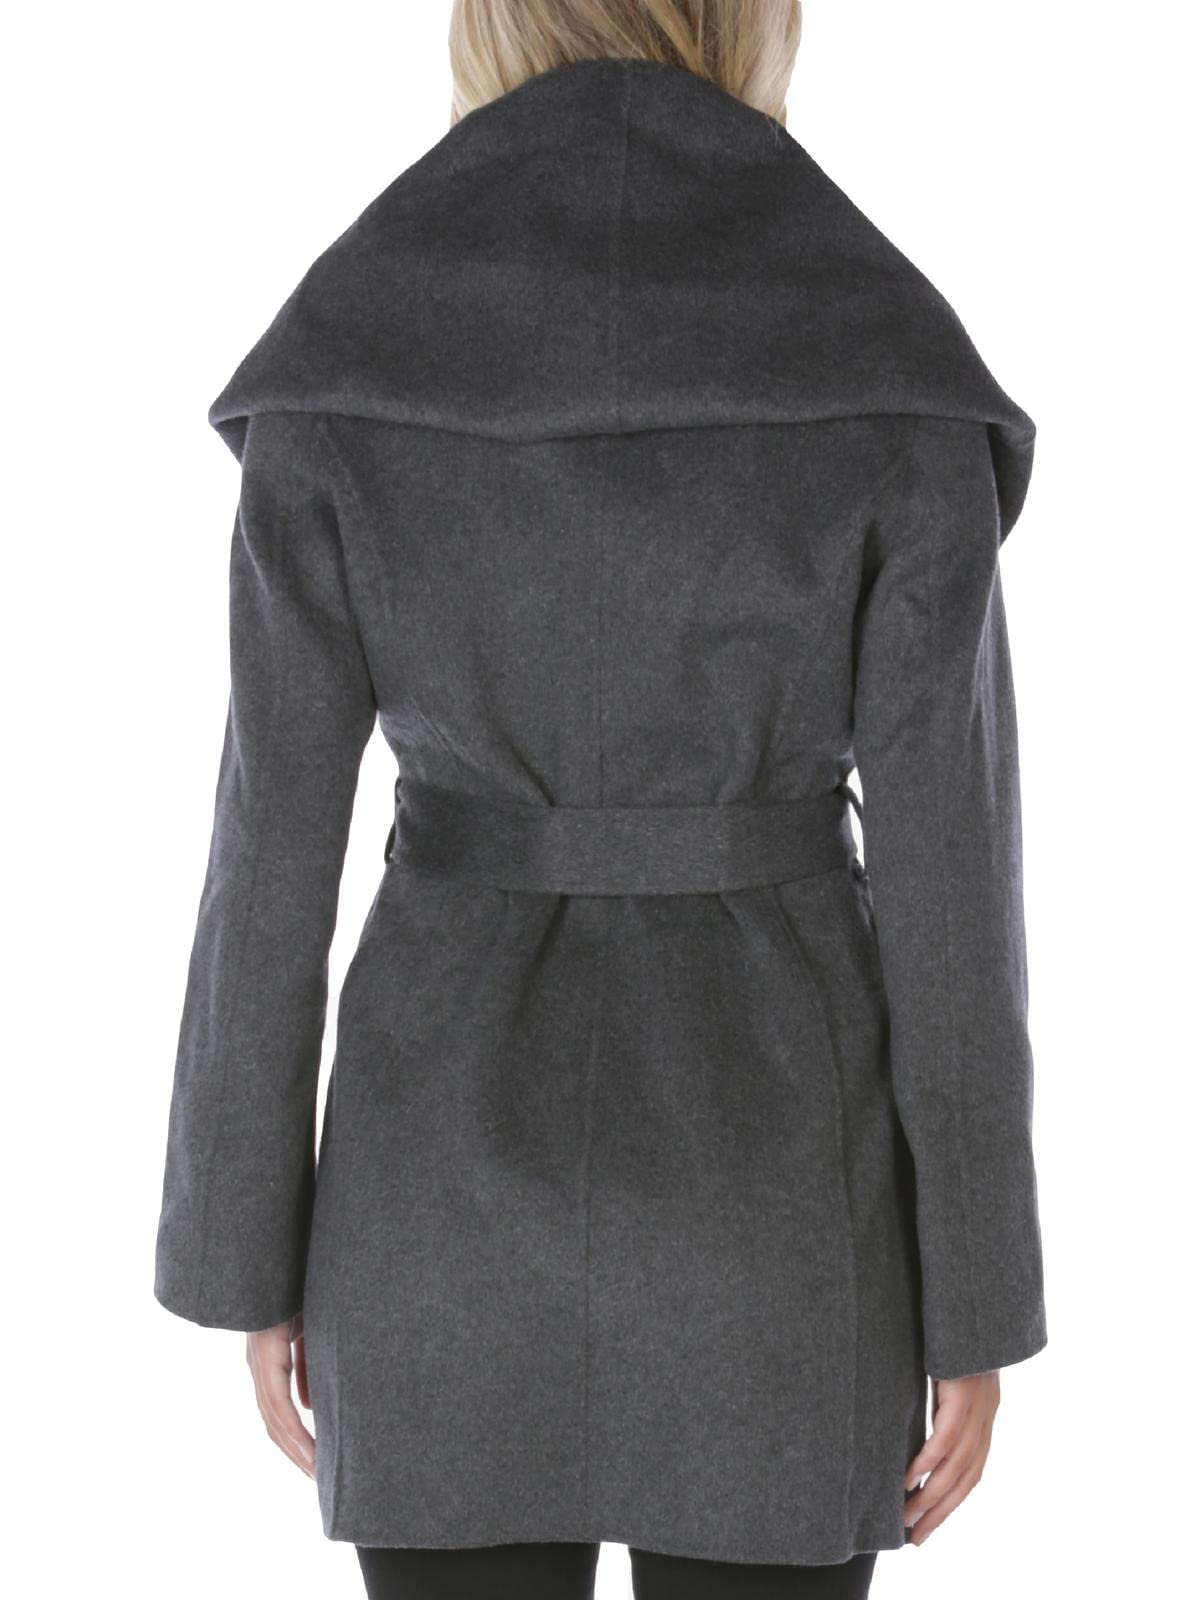 TAHARI Women's Double Face Wool Blend Wrap Coat with Oversized Collar